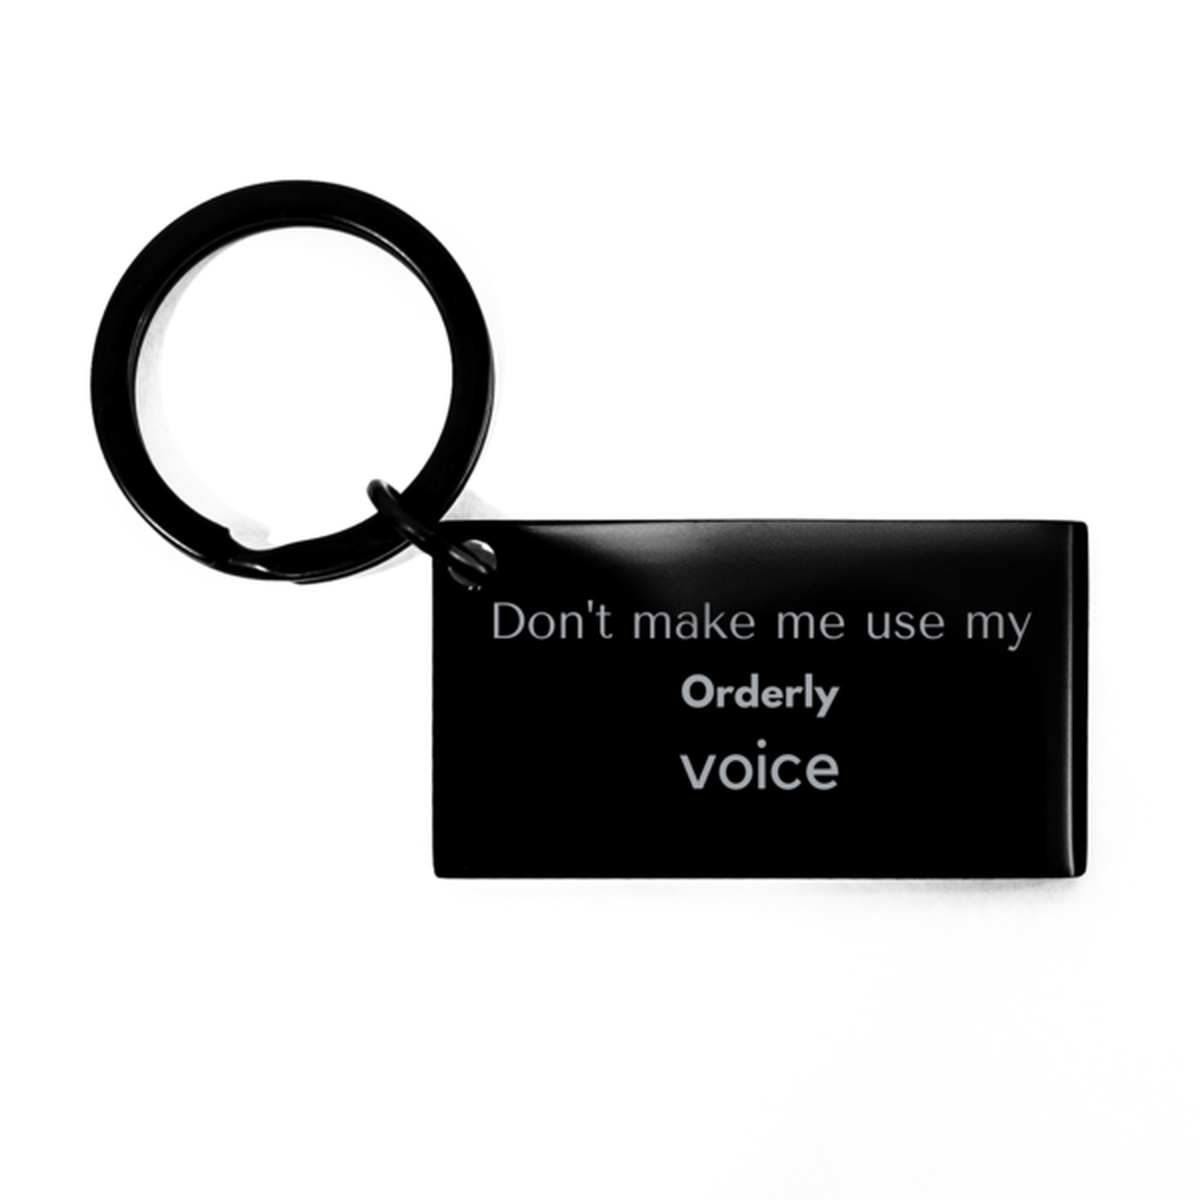 Don't make me use my Orderly voice, Sarcasm Orderly Gifts, Christmas Orderly Keychain Birthday Unique Gifts For Orderly Coworkers, Men, Women, Colleague, Friends